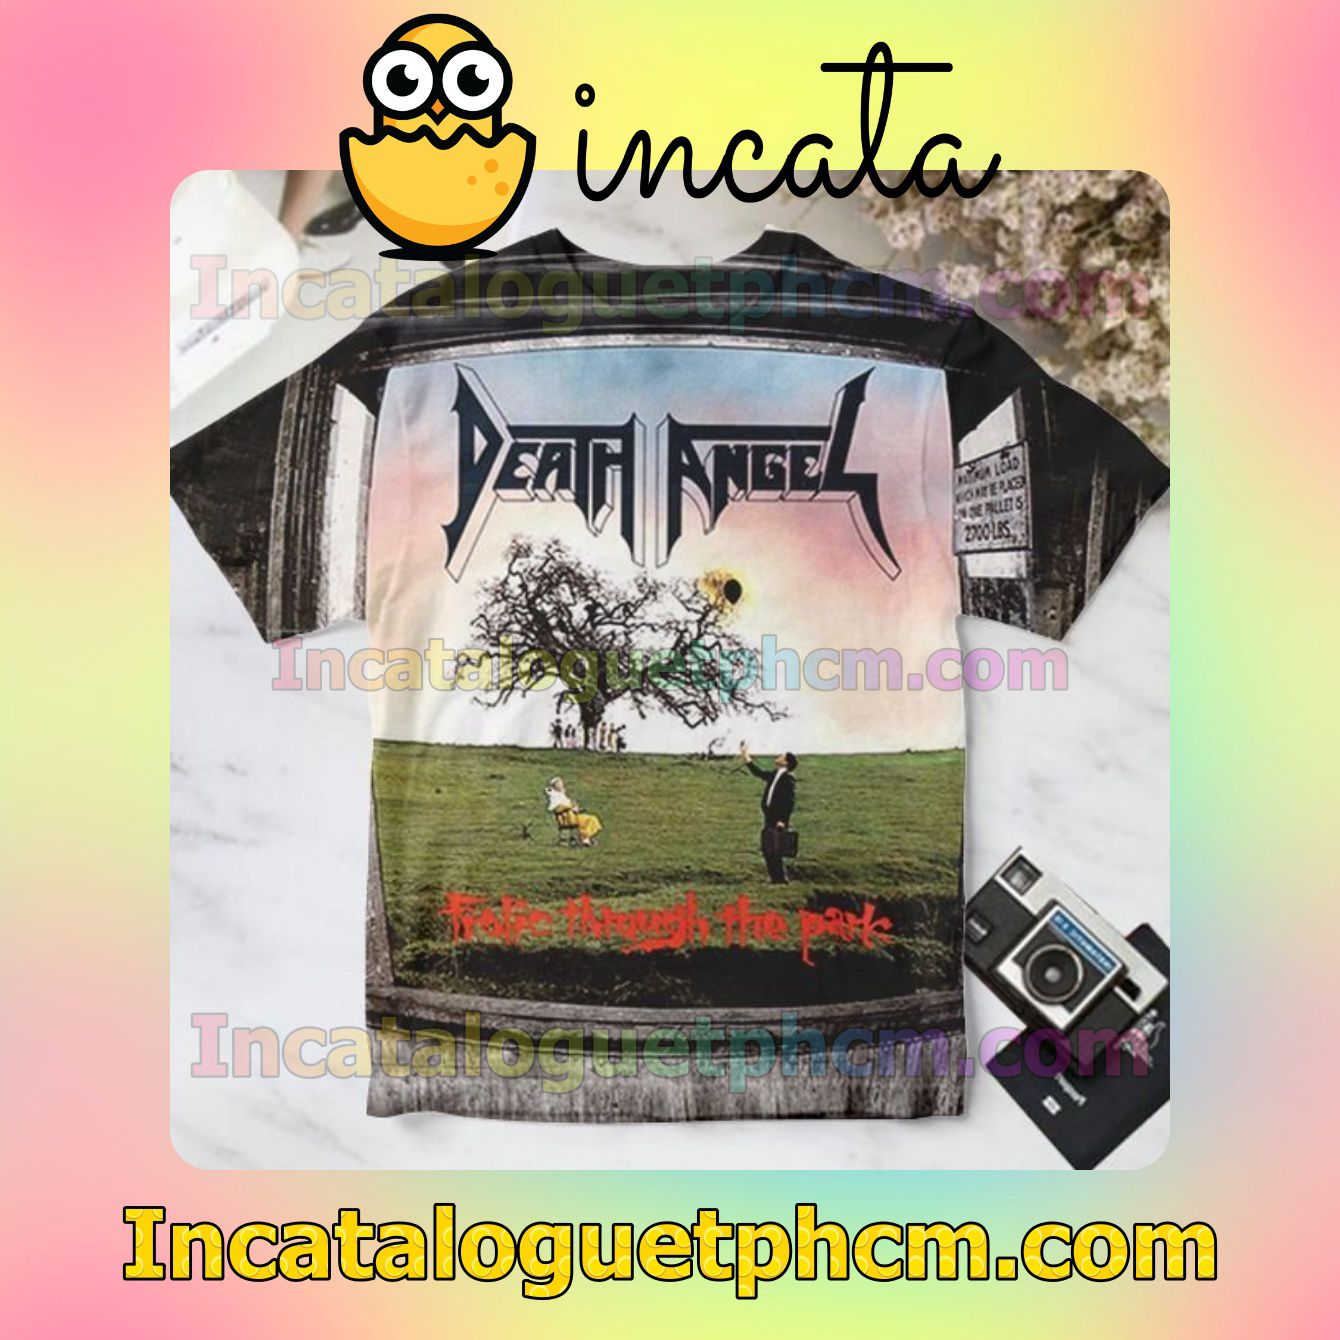 Death Angel Frolic In Through The Park Album Cover Personalized Shirt